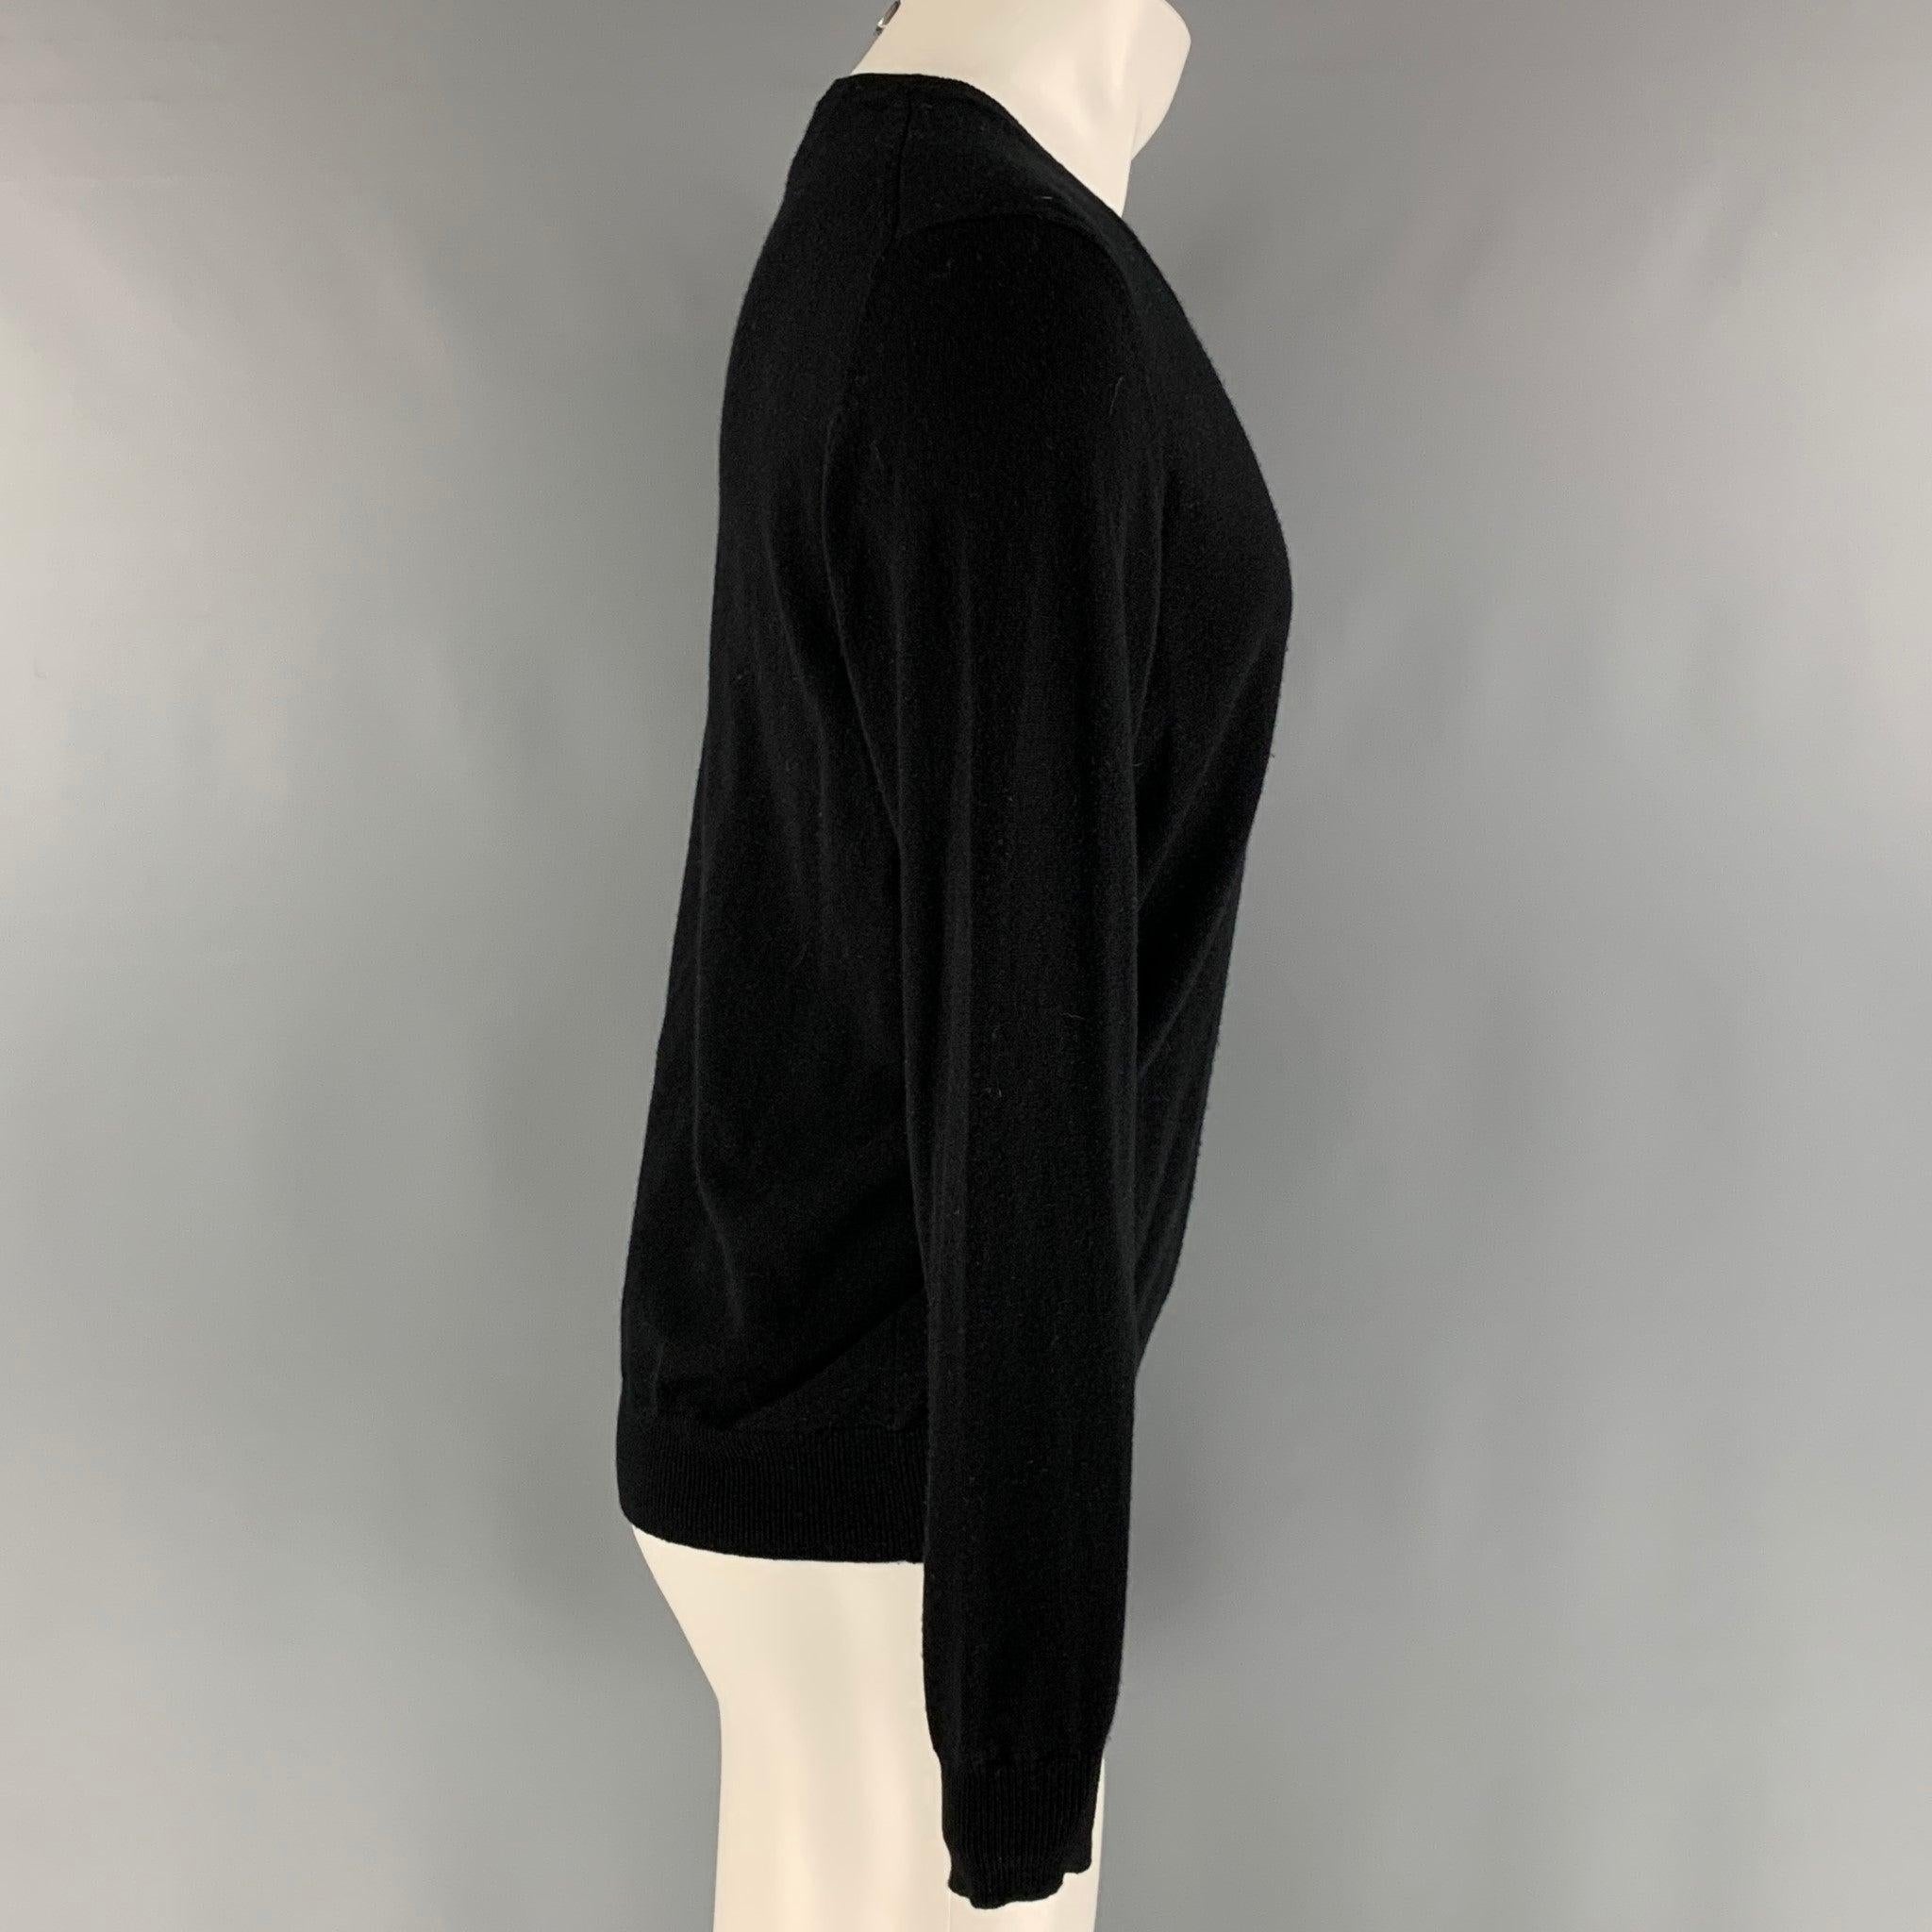 SAKS FIFTH AVENUE pullover comes in a black cashmere knit featuring a V-neck.Good Pre-Owned Condition. Moderate signs of wear and piling. 

Marked:   M 

Measurements: 
 
Shoulder: 17 inches Chest: 46 inches Sleeve: 25.5 inches Length: 26 inches  

